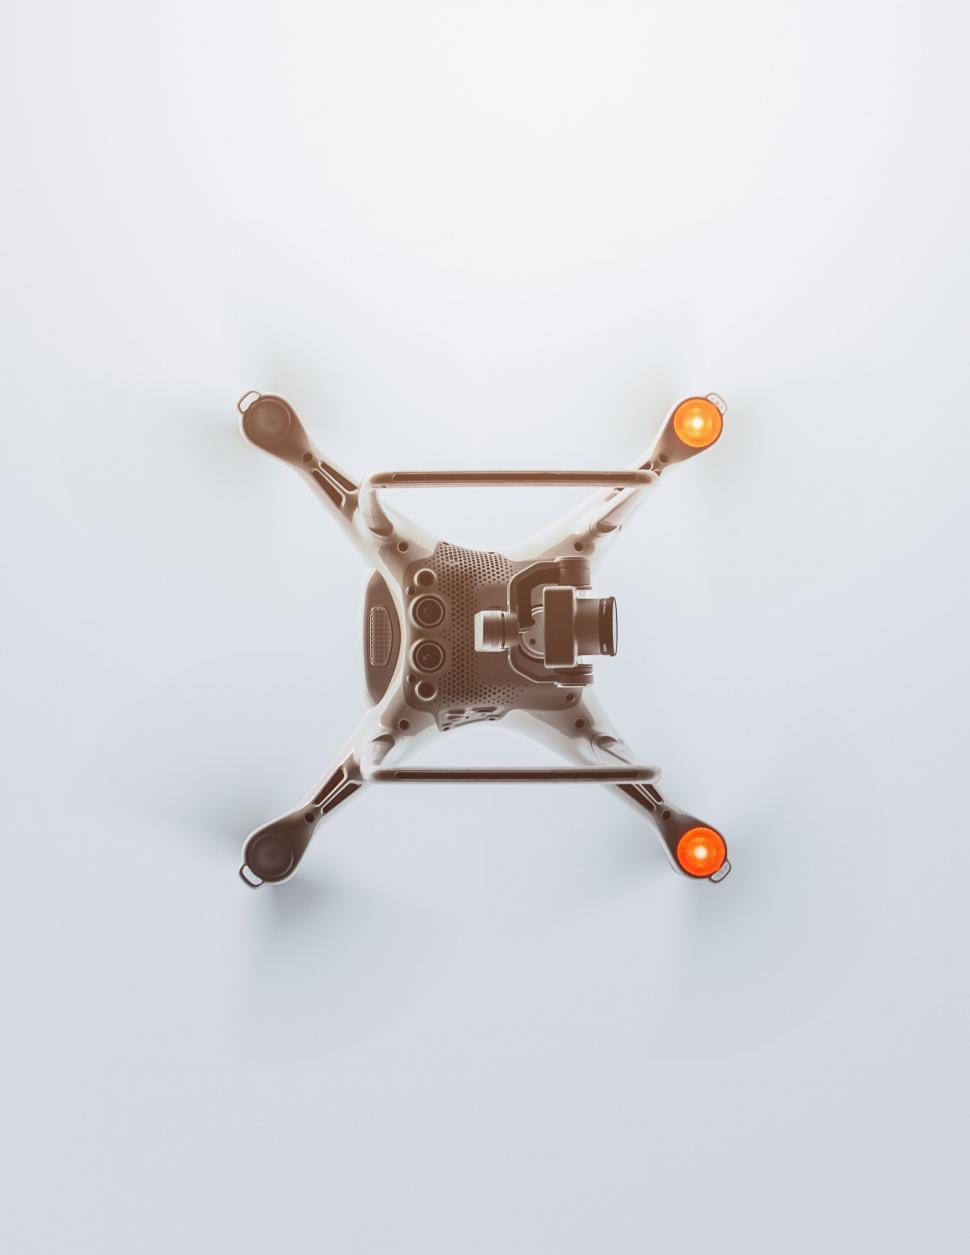 Free Image of Drone hovering in a bright clear sky 